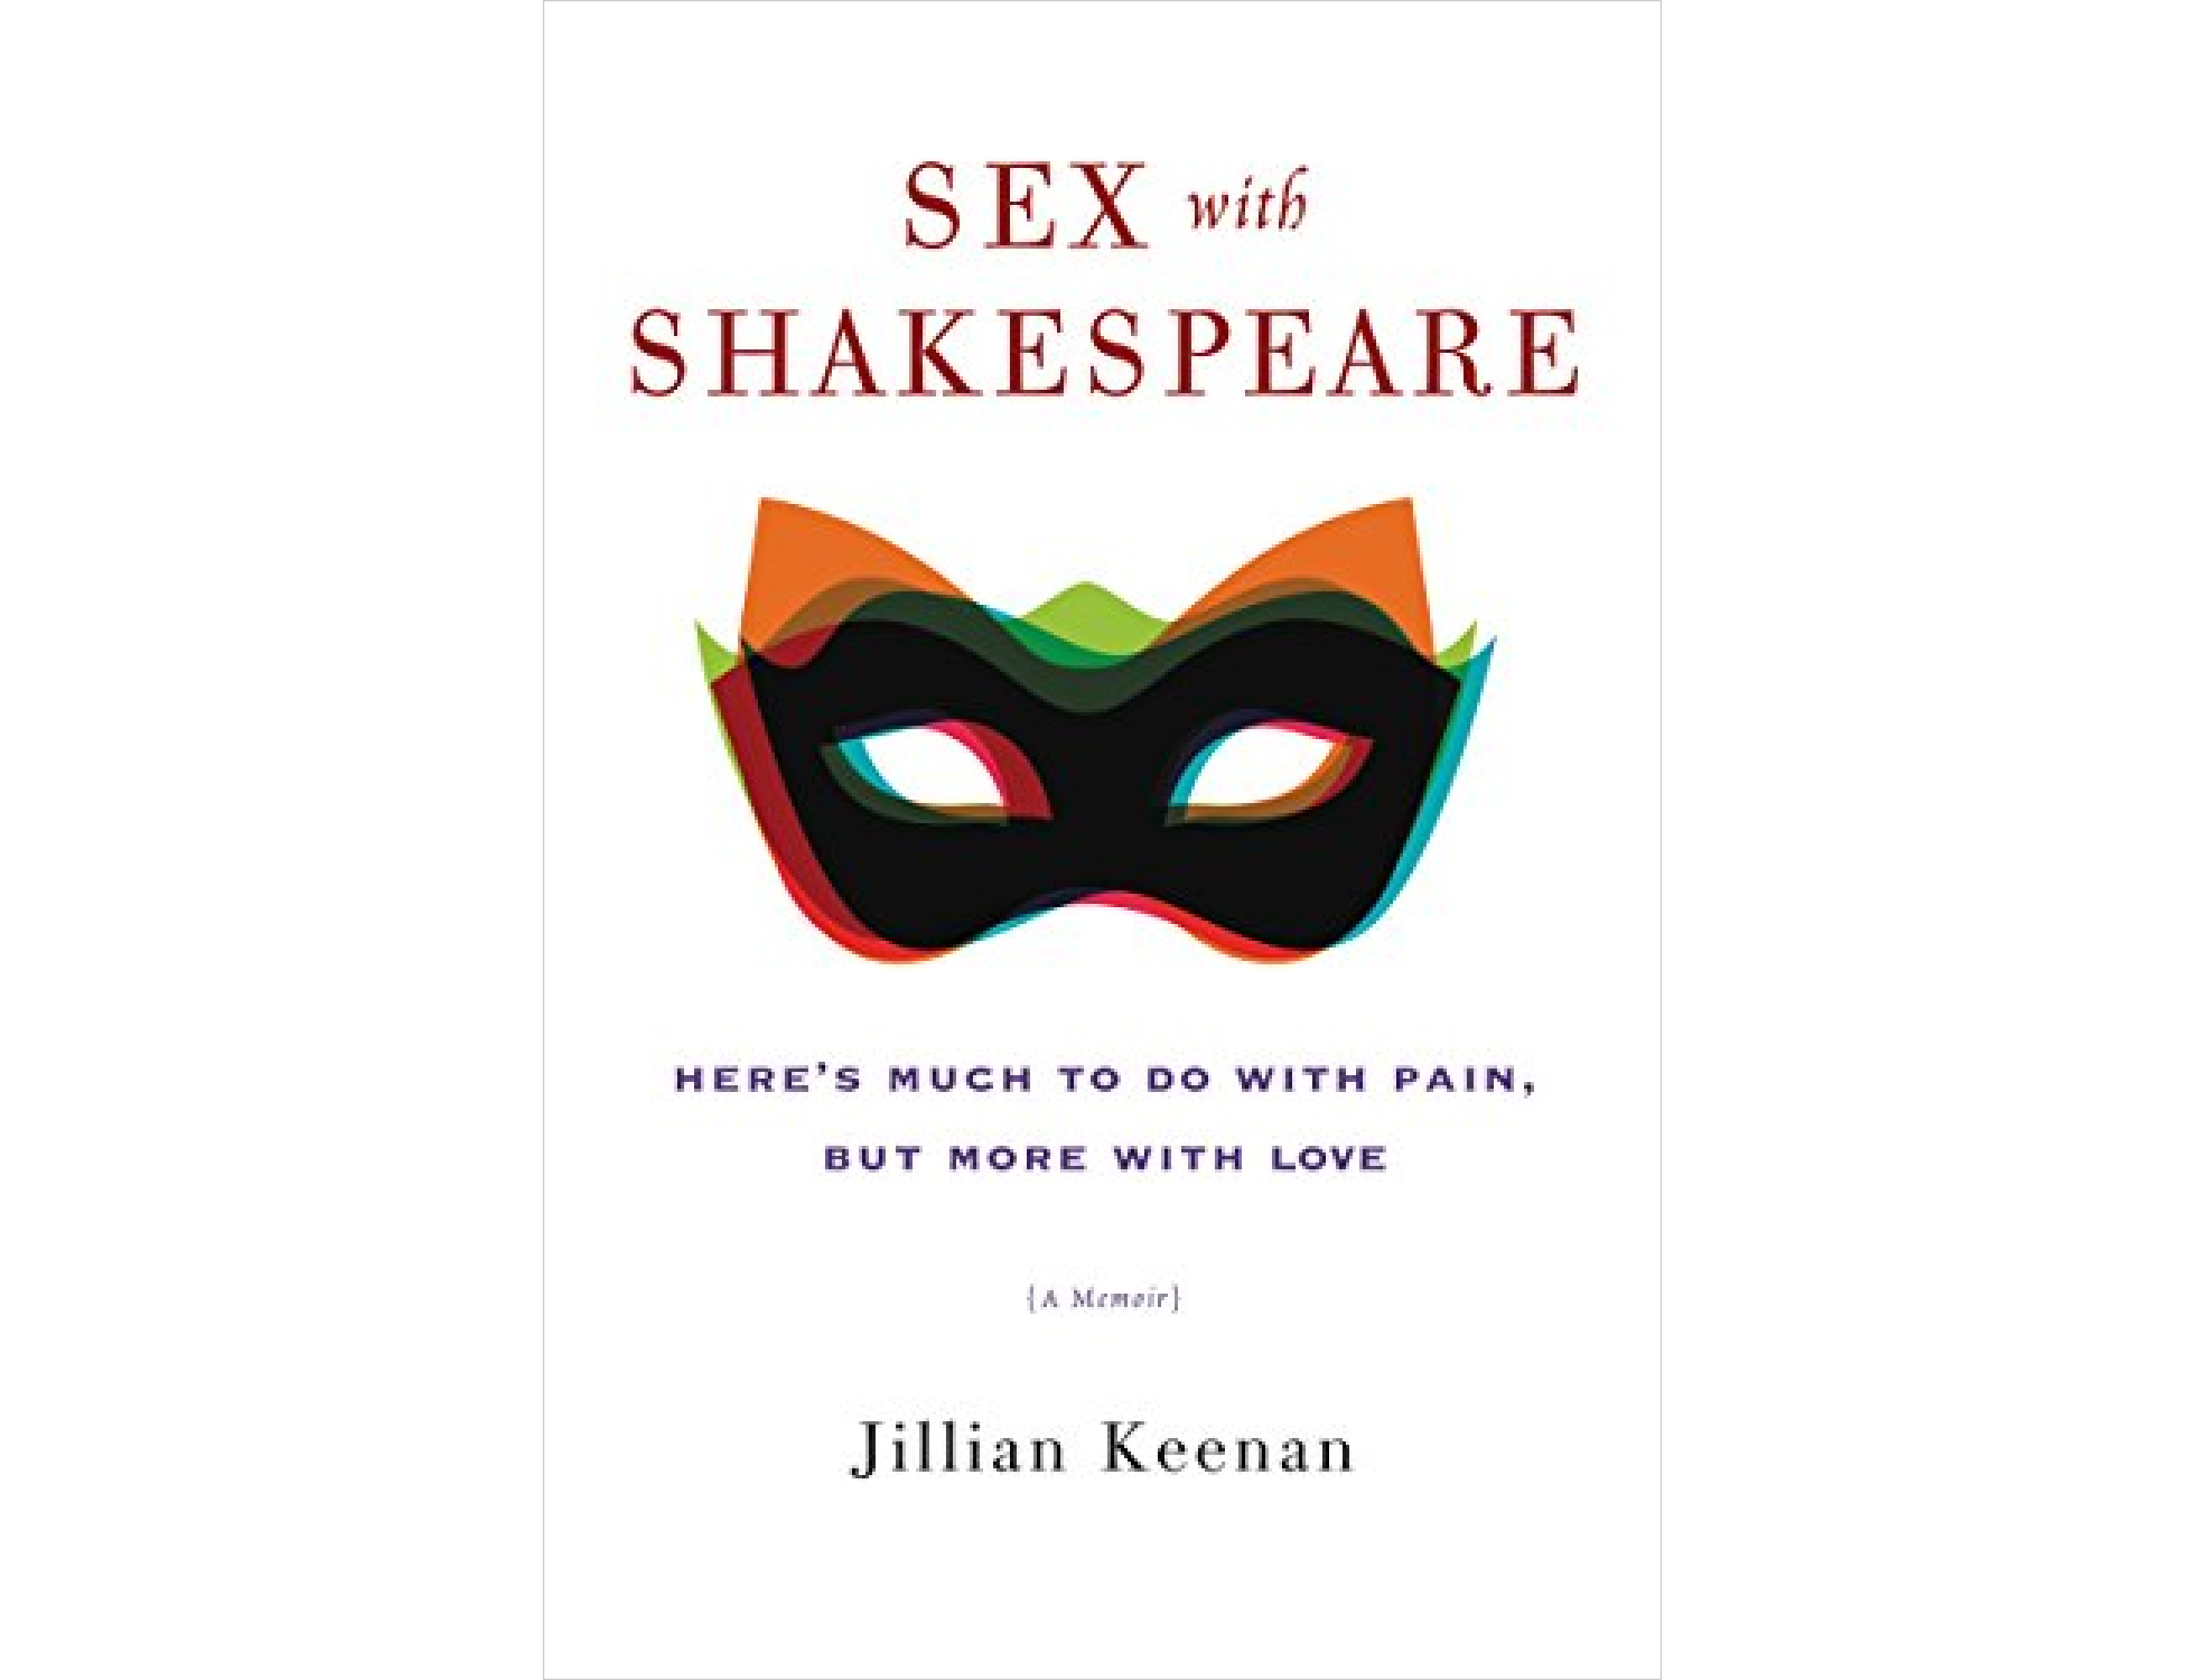 Books on Sex, Lifestyle, Art and More